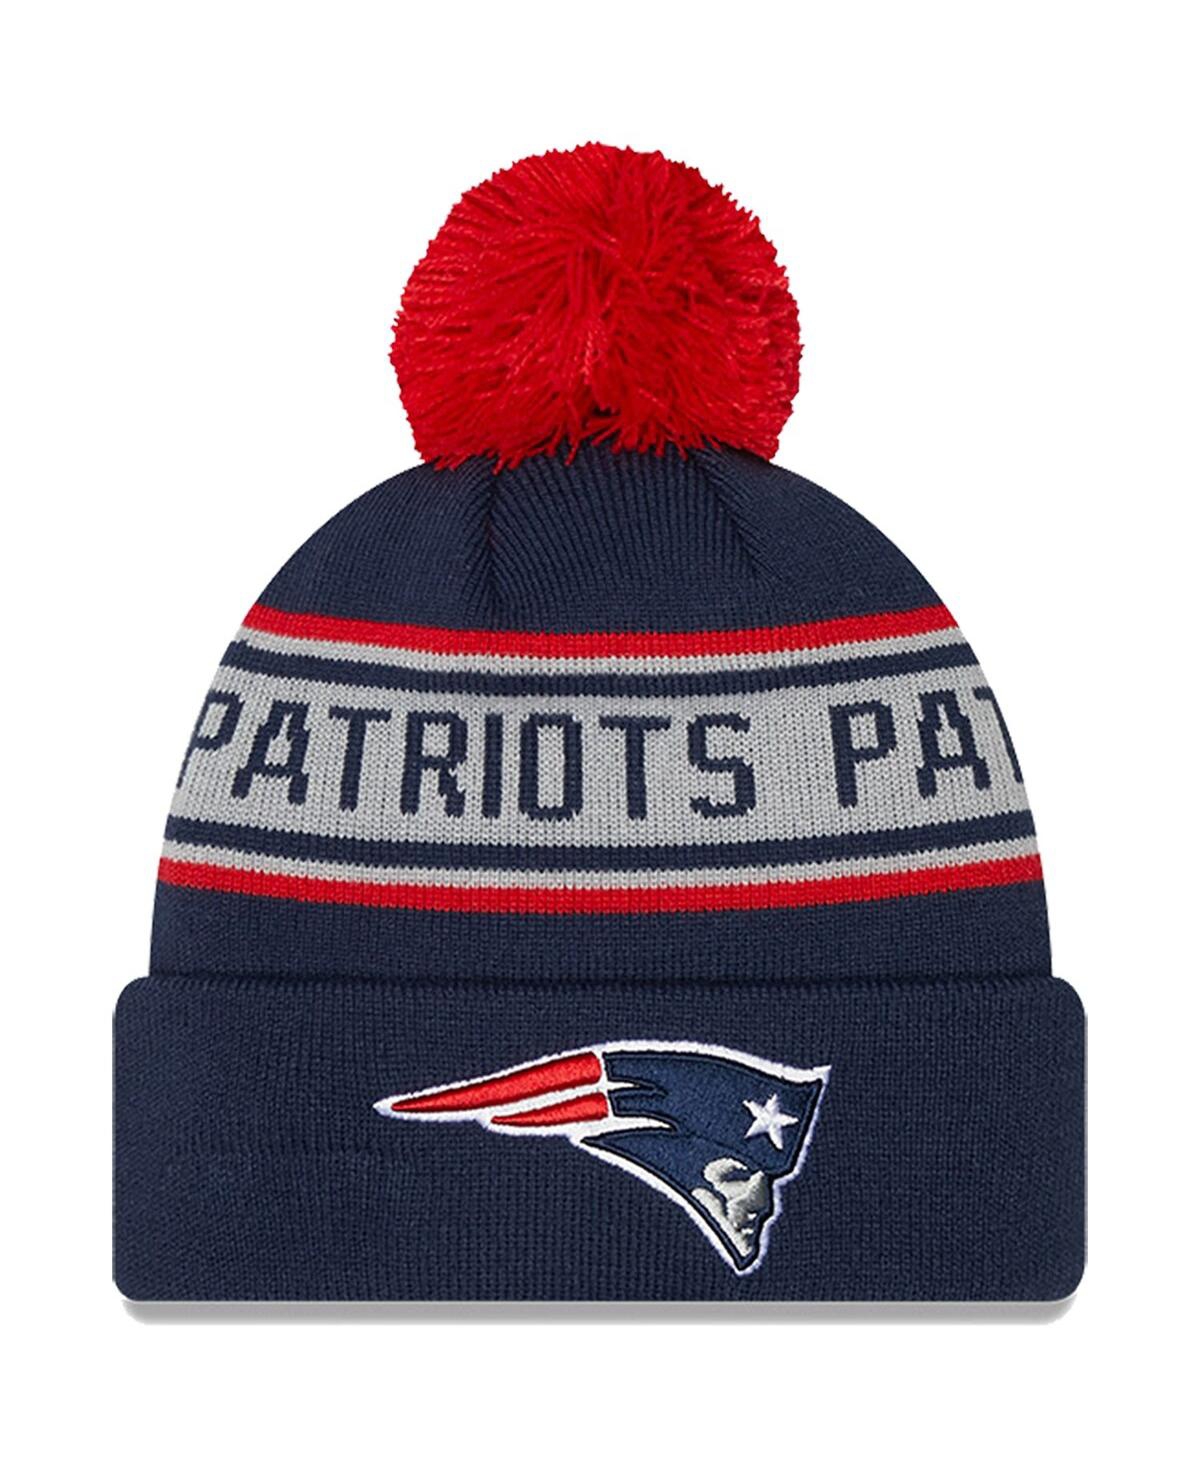 New Era Babies' Preschool Boys And Girls  Navy New England Patriots Repeat Cuffed Knit Hat With Pom